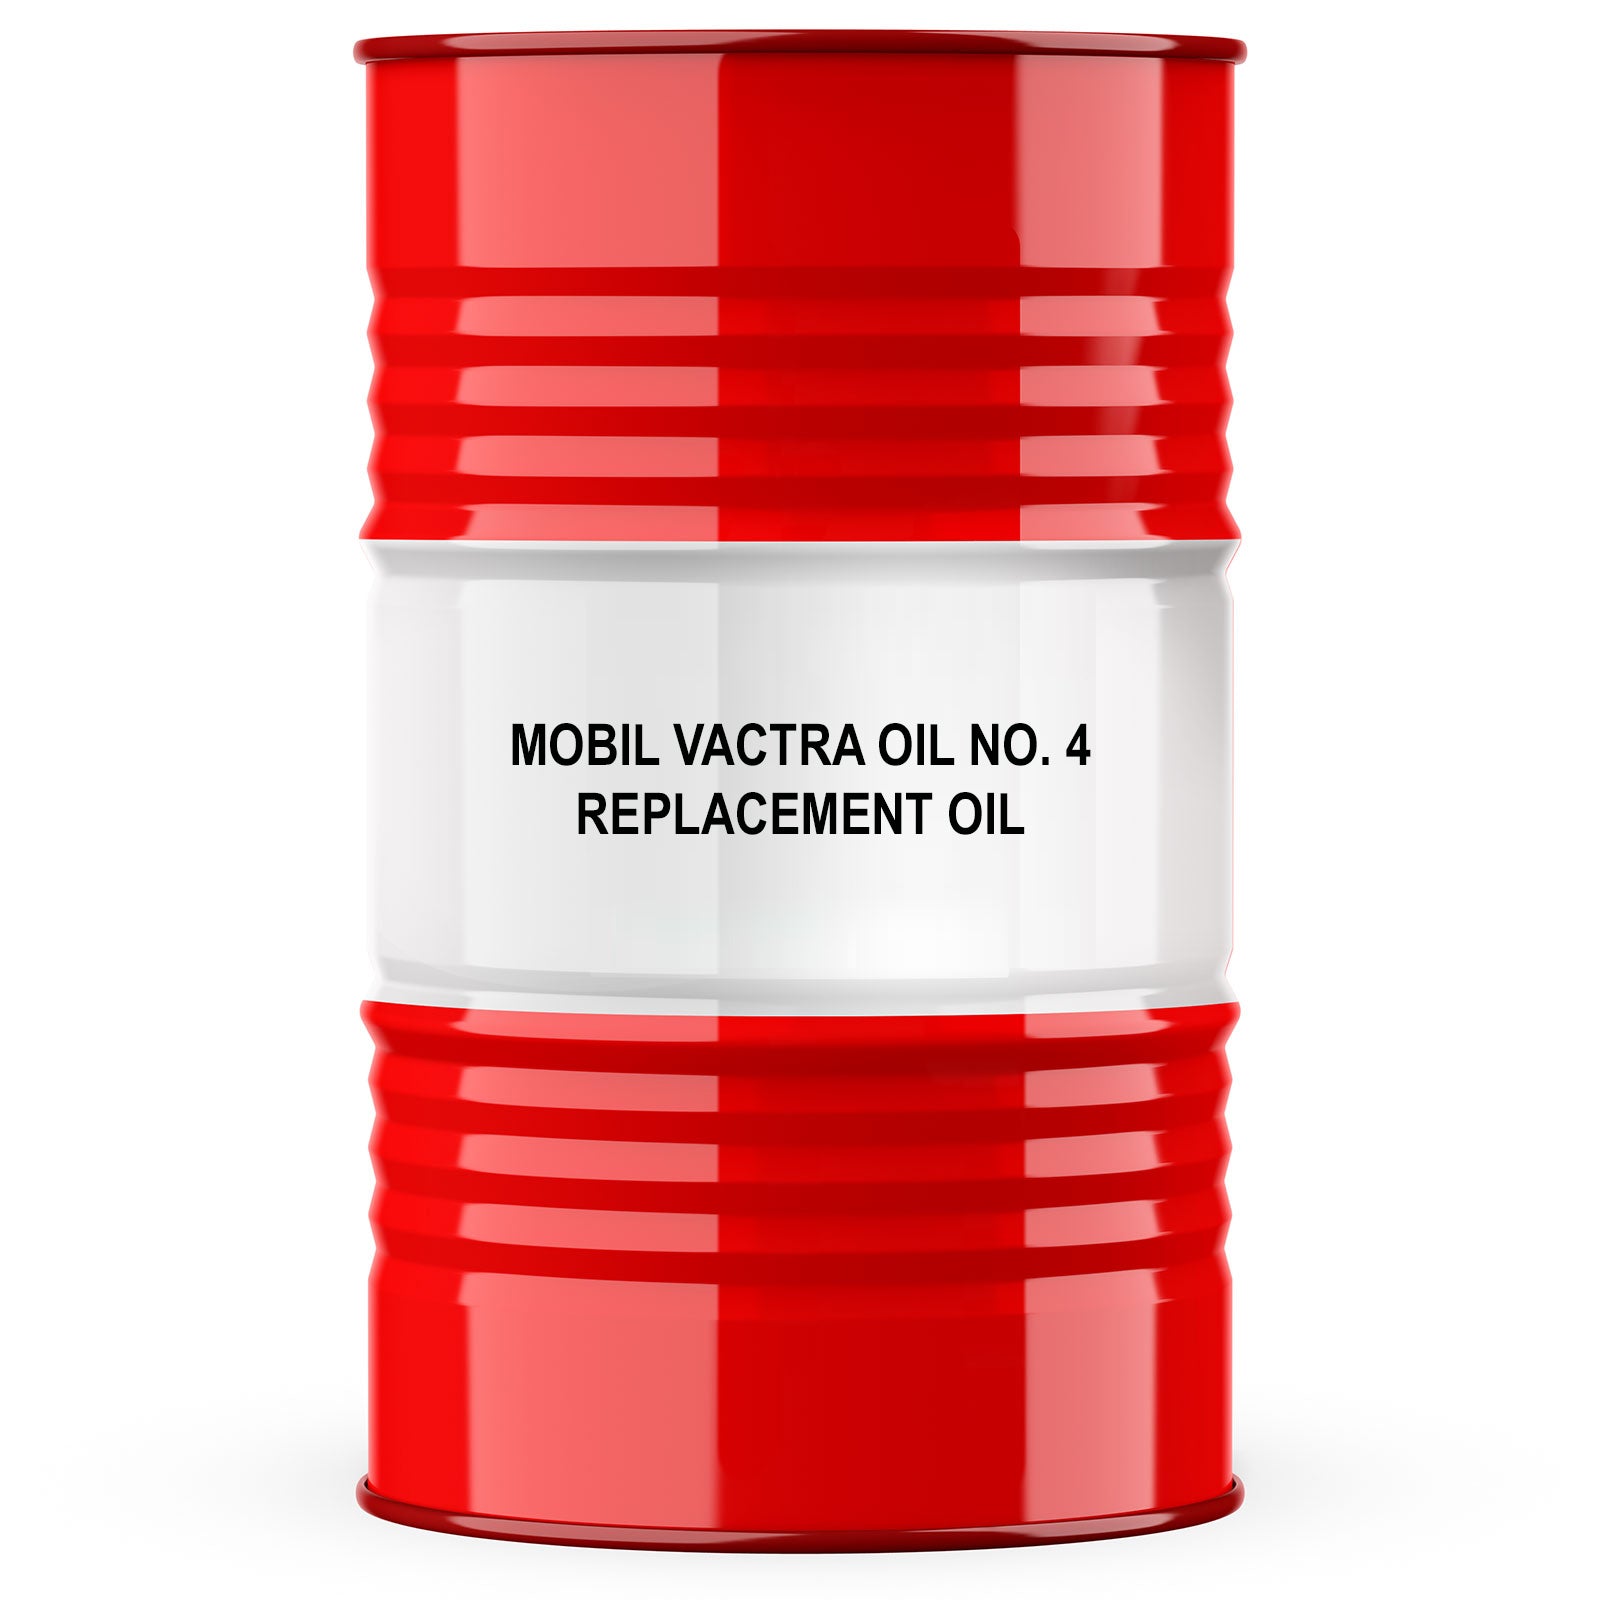 Mobil Vactra Oil No. 4 Replacement Oil.